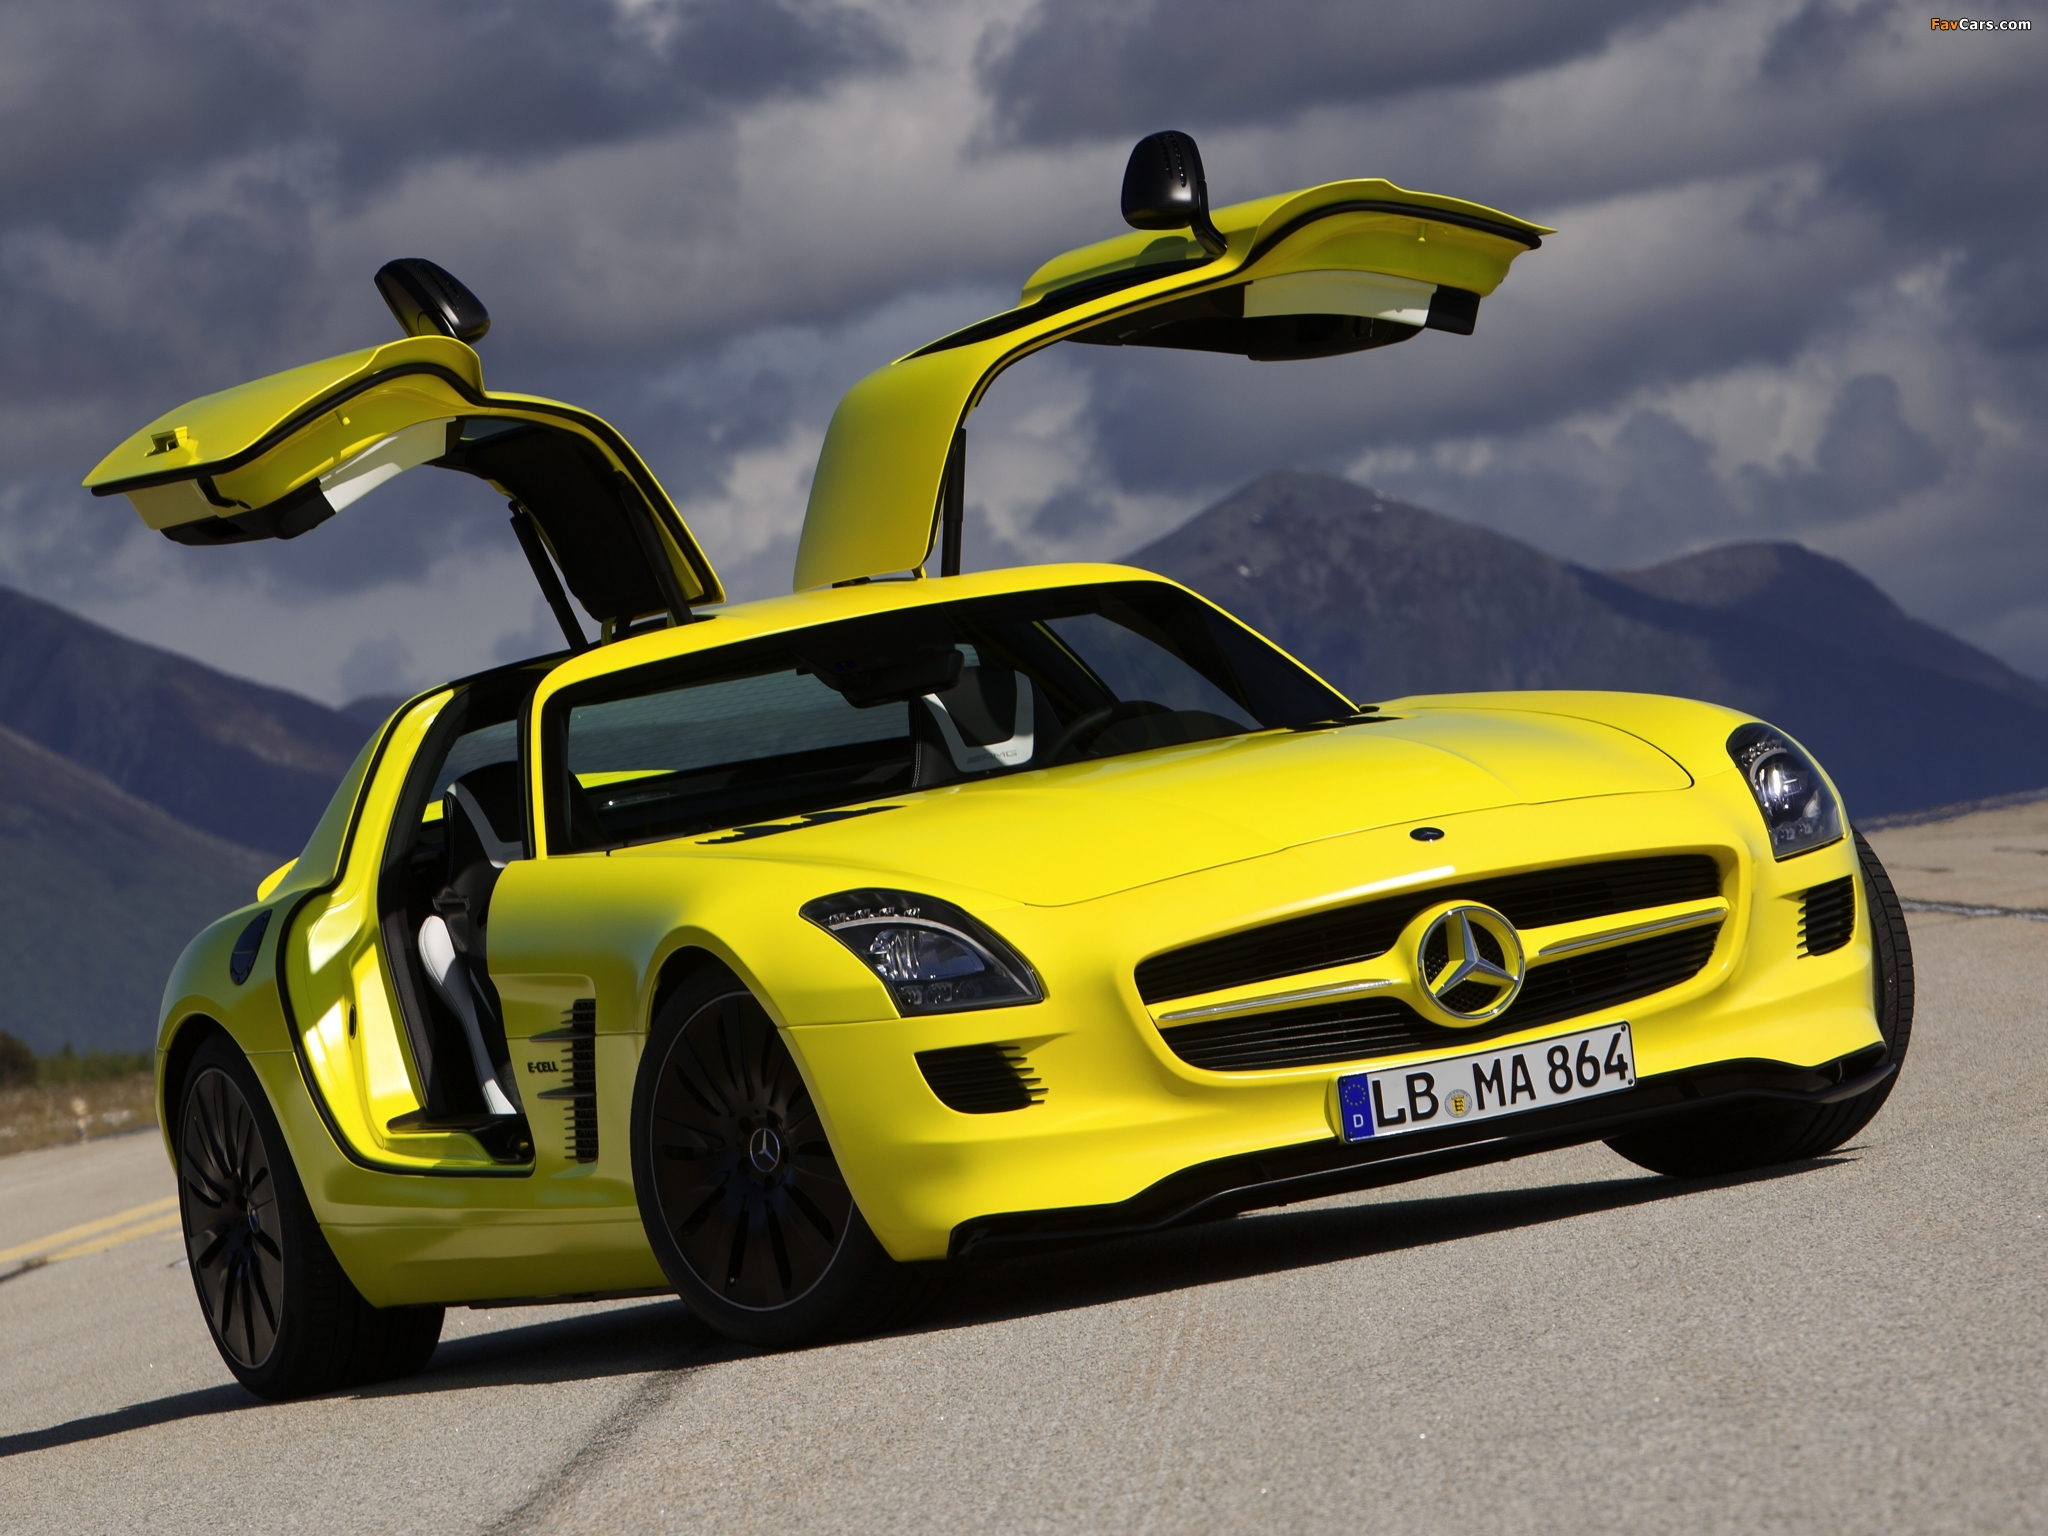 Mercedes-Benz SLS 63 AMG E-Cell Prototype (C197) 2010 wallpapers (2048 x 1536)